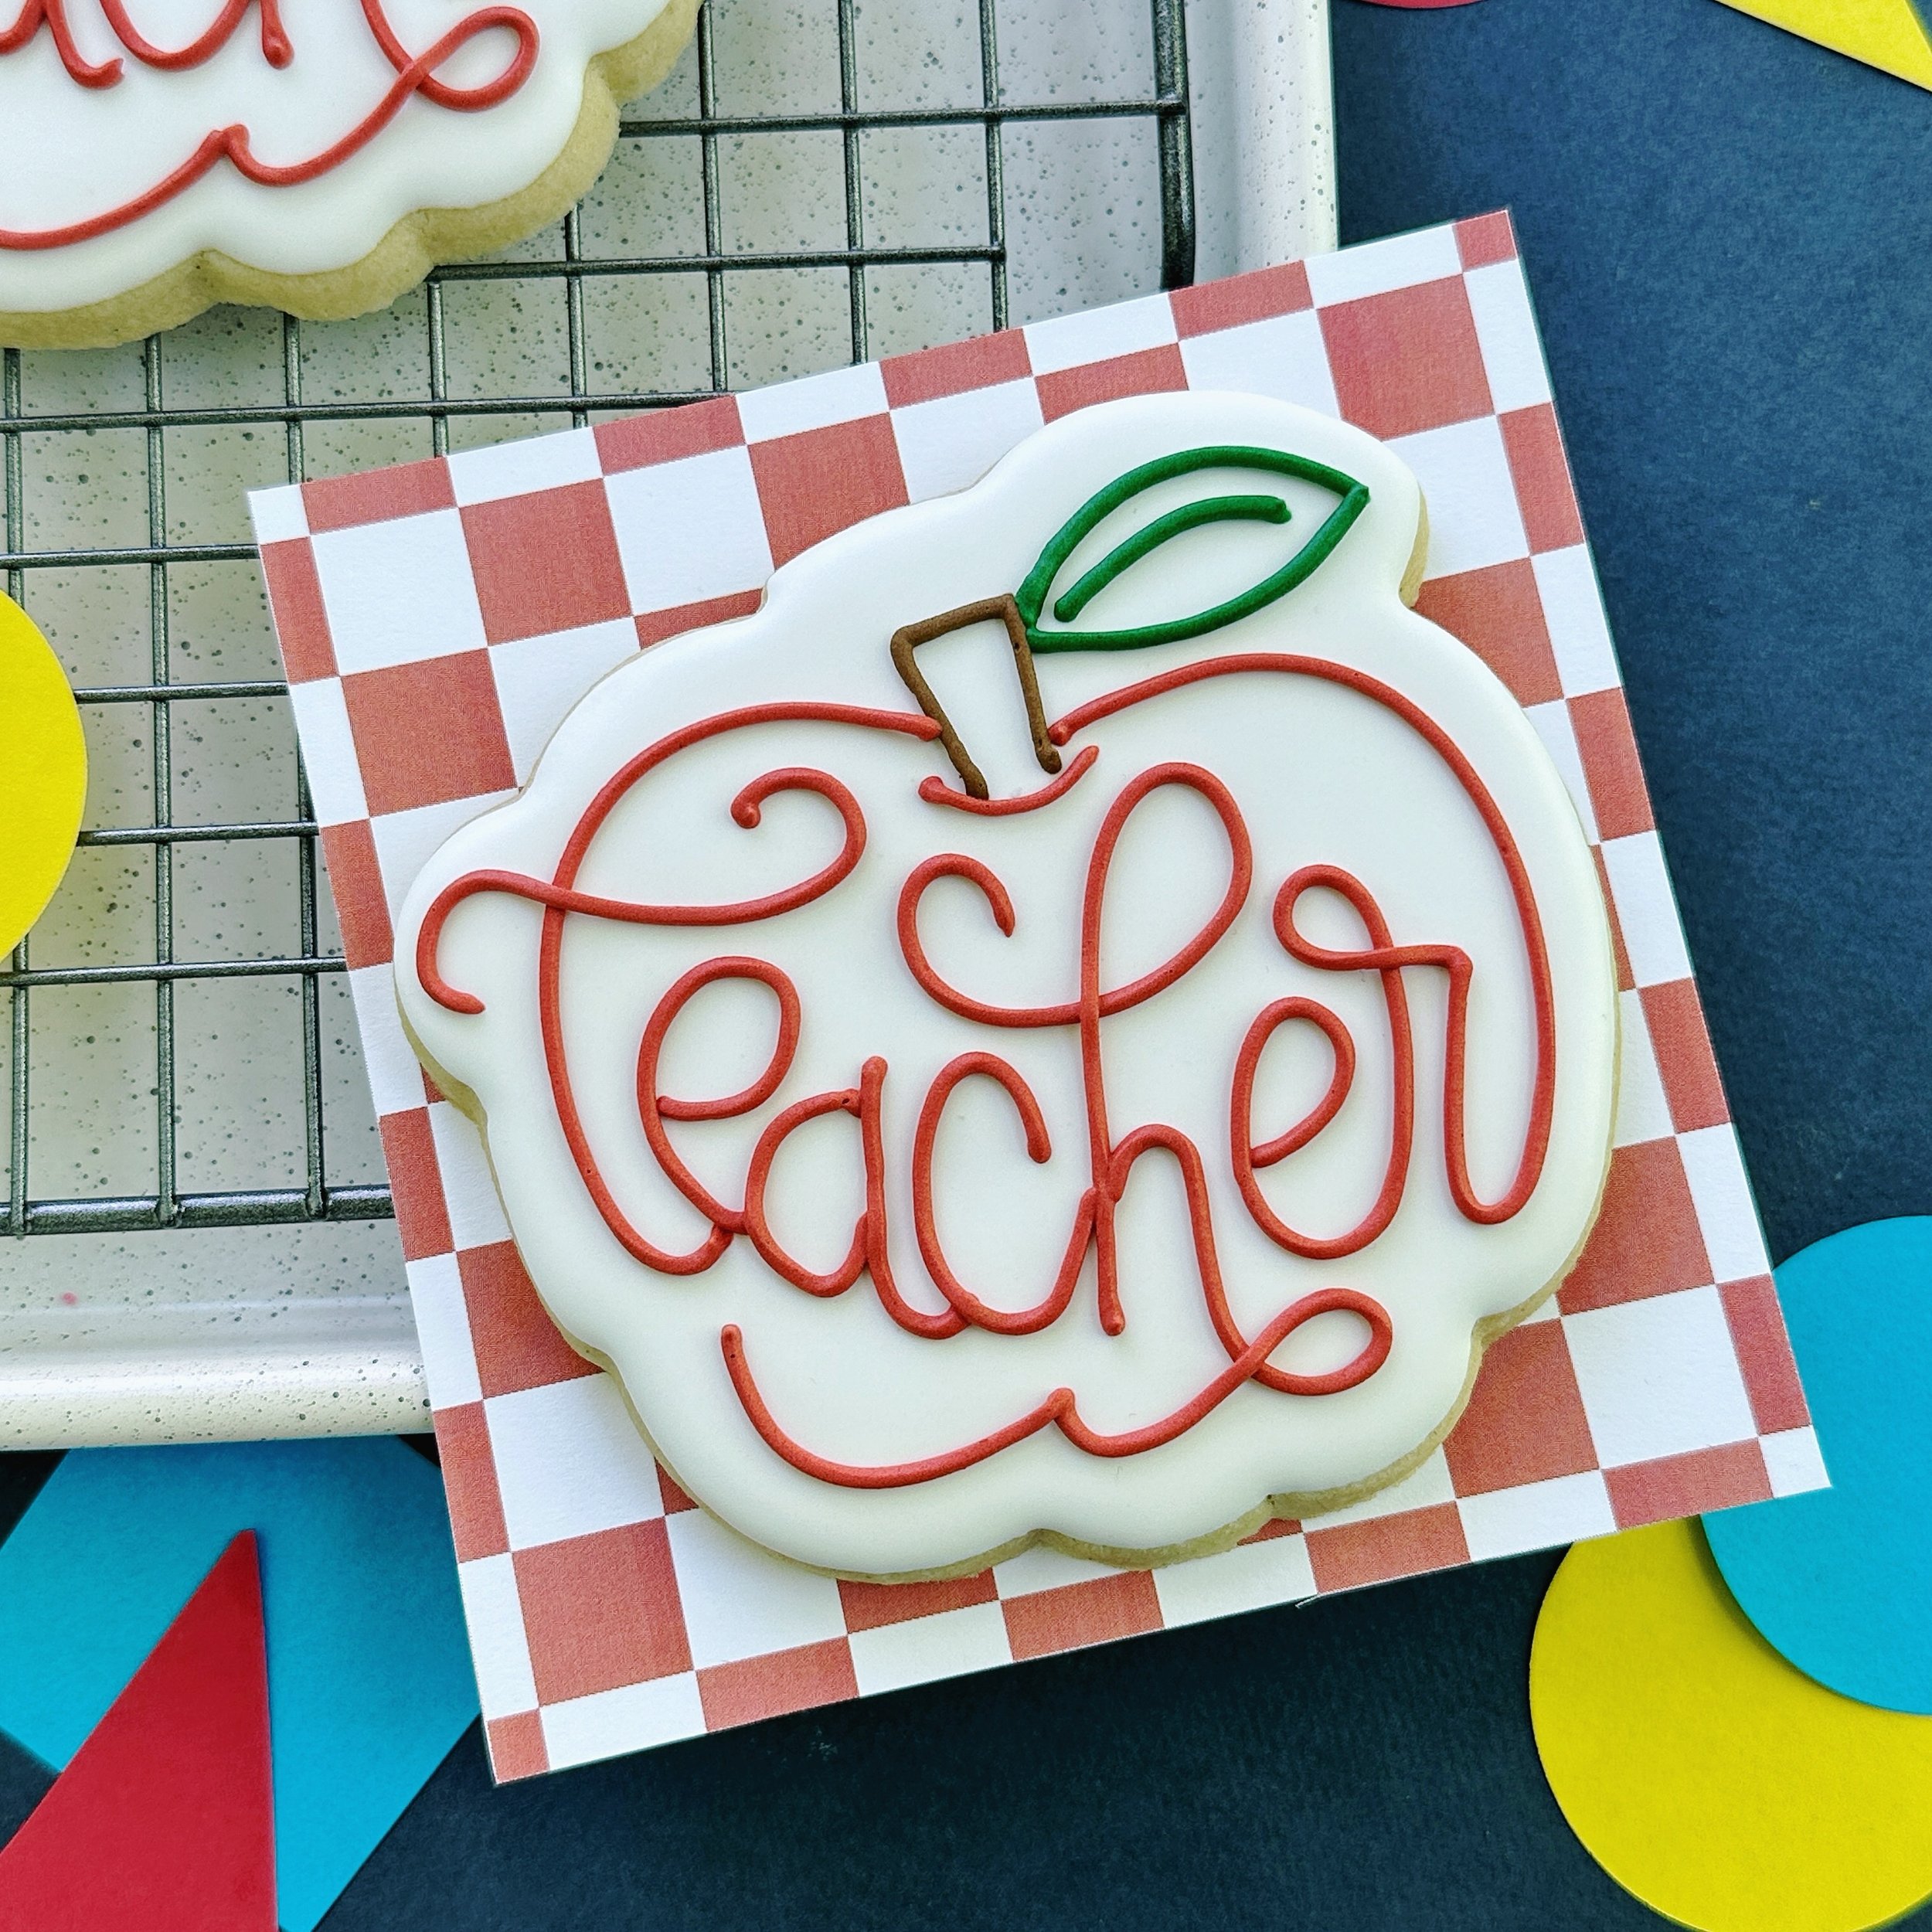 Thanks to @kaleidacuts for making the perfect teacher appreciation cutter. I didn&rsquo;t have to think too hard with this presale, and I love it! 😂
Preorders are still live through Monday. 

#teacherappreciation #teacherappreciationcookies #customc